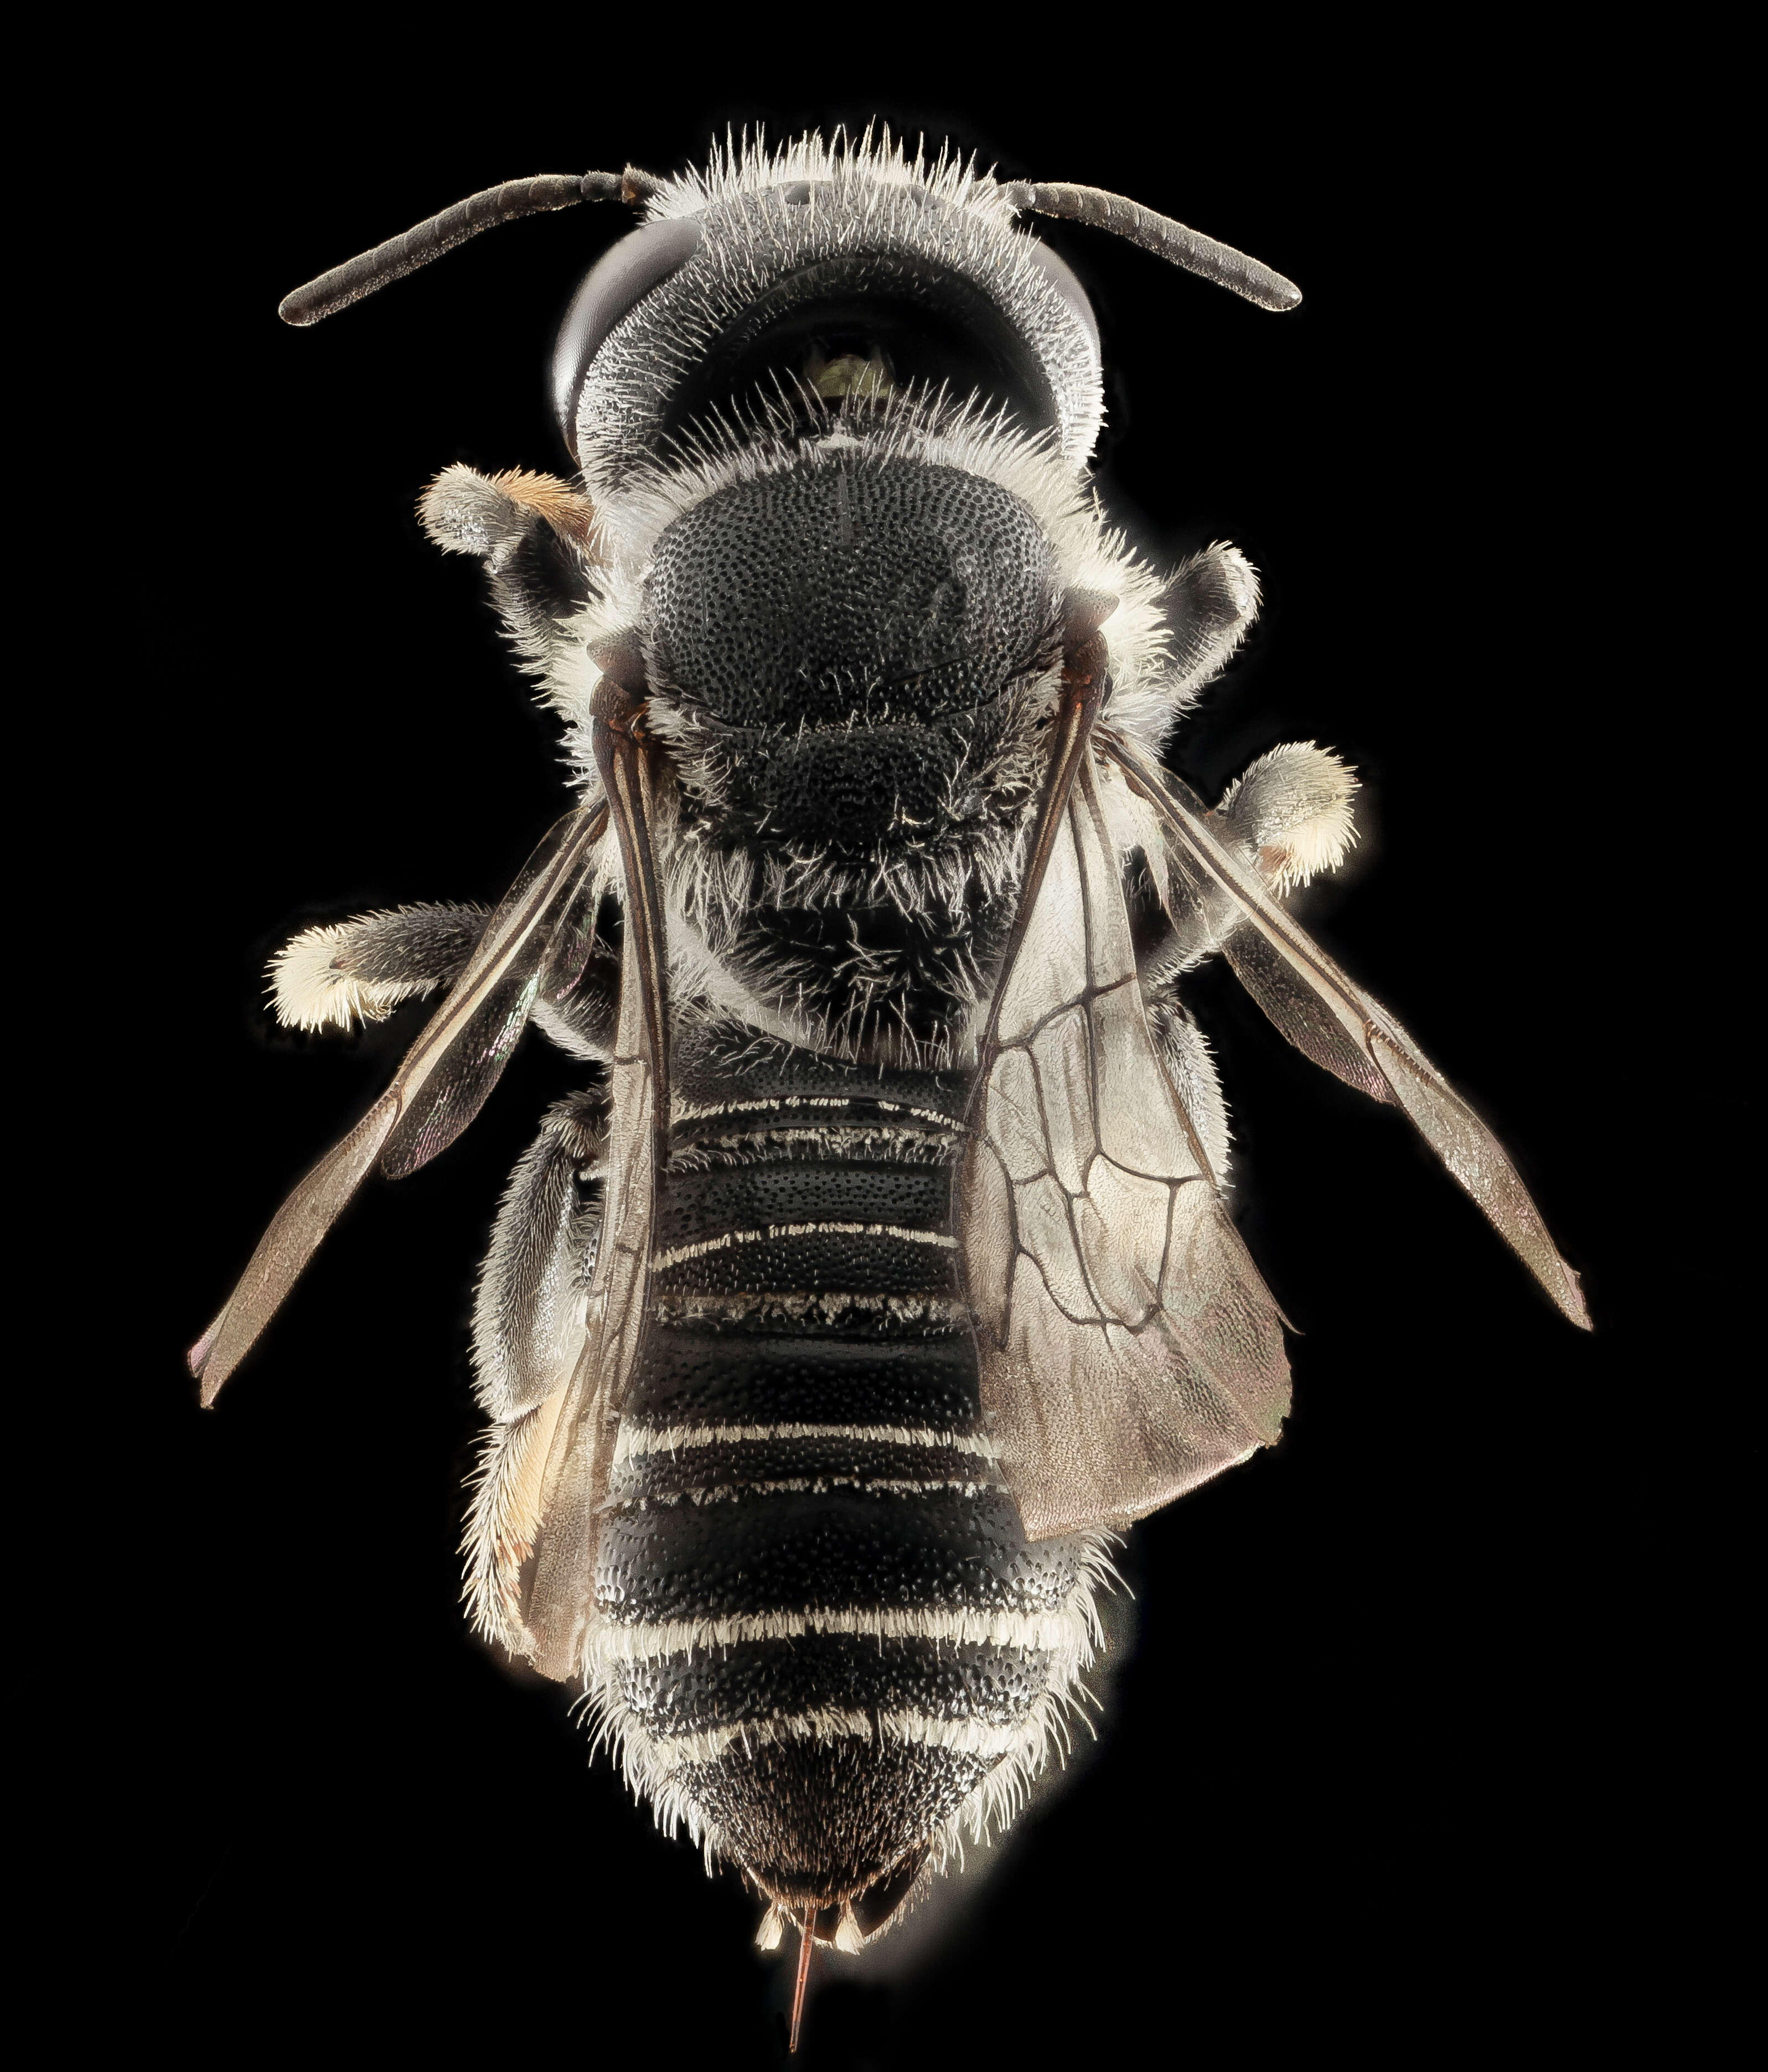 Image of leaf-cutter bees, mason bees, and relatives